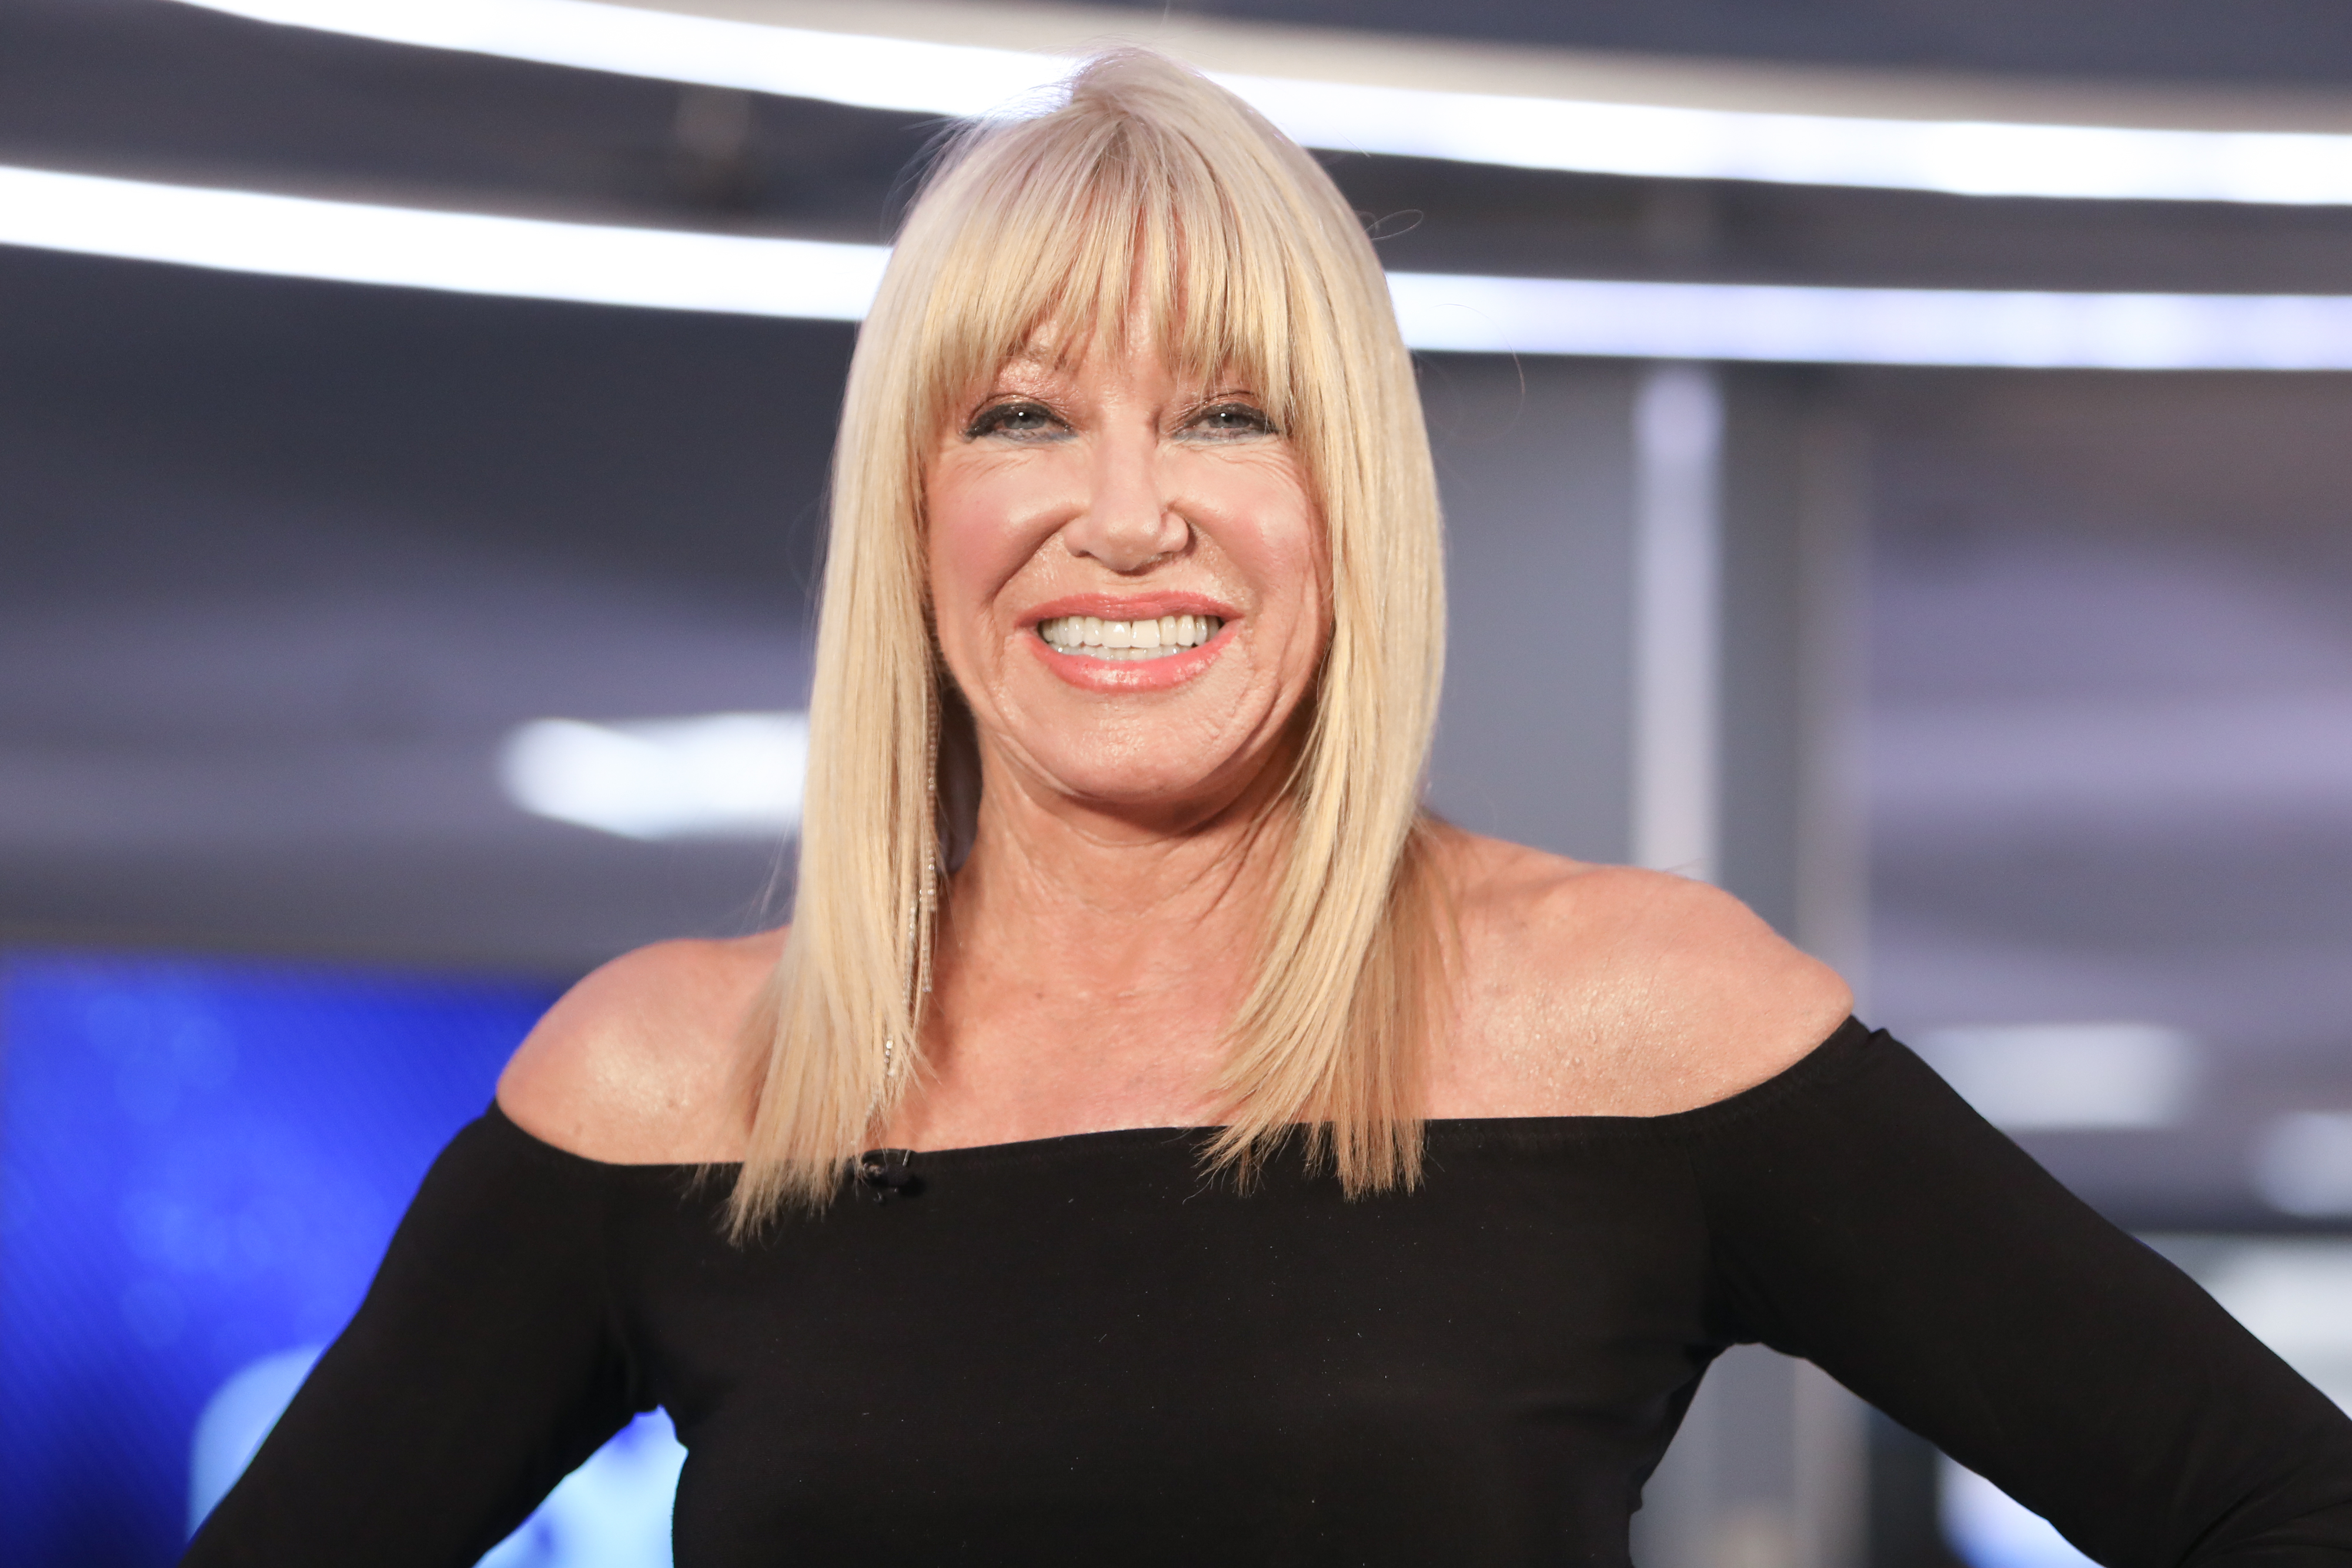 Suzanne Somers visits “Extra” in Burbank, California on February 19, 2020 | Source: Getty Images